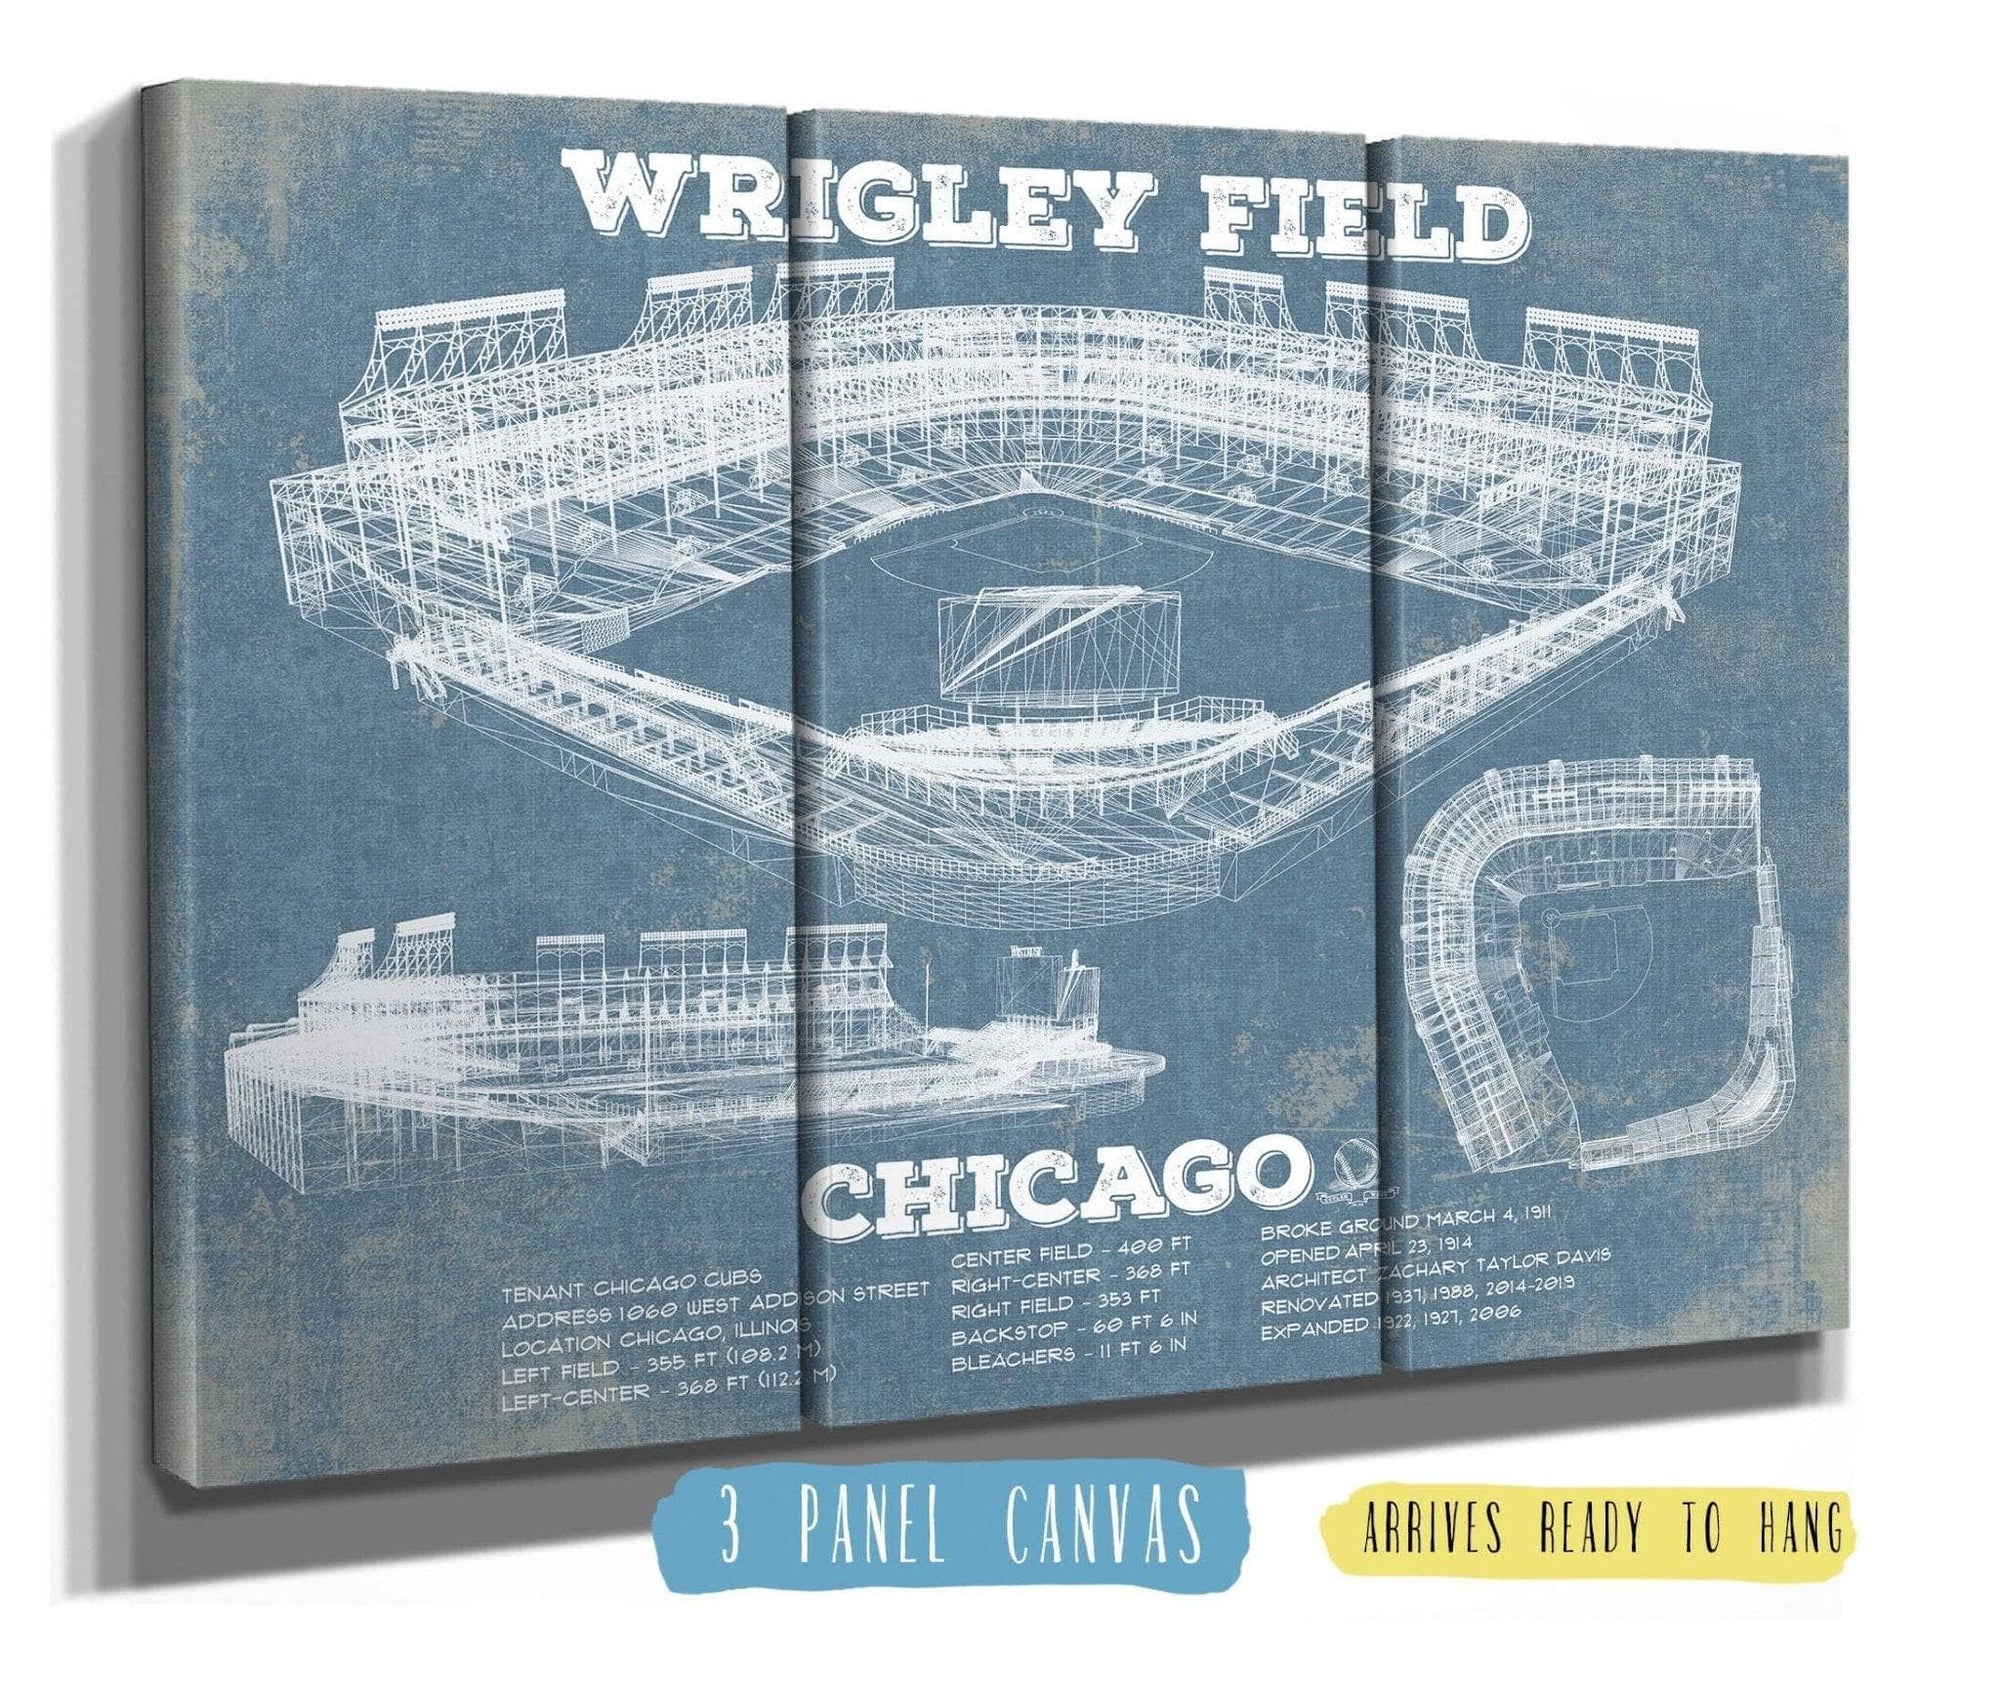 Cutler West Baseball Collection 48" x 32" / 3 Panel Canvas Wrap Vintage Wrigley Field Print - Chicago Cubs Baseball Print 703108870-TOP